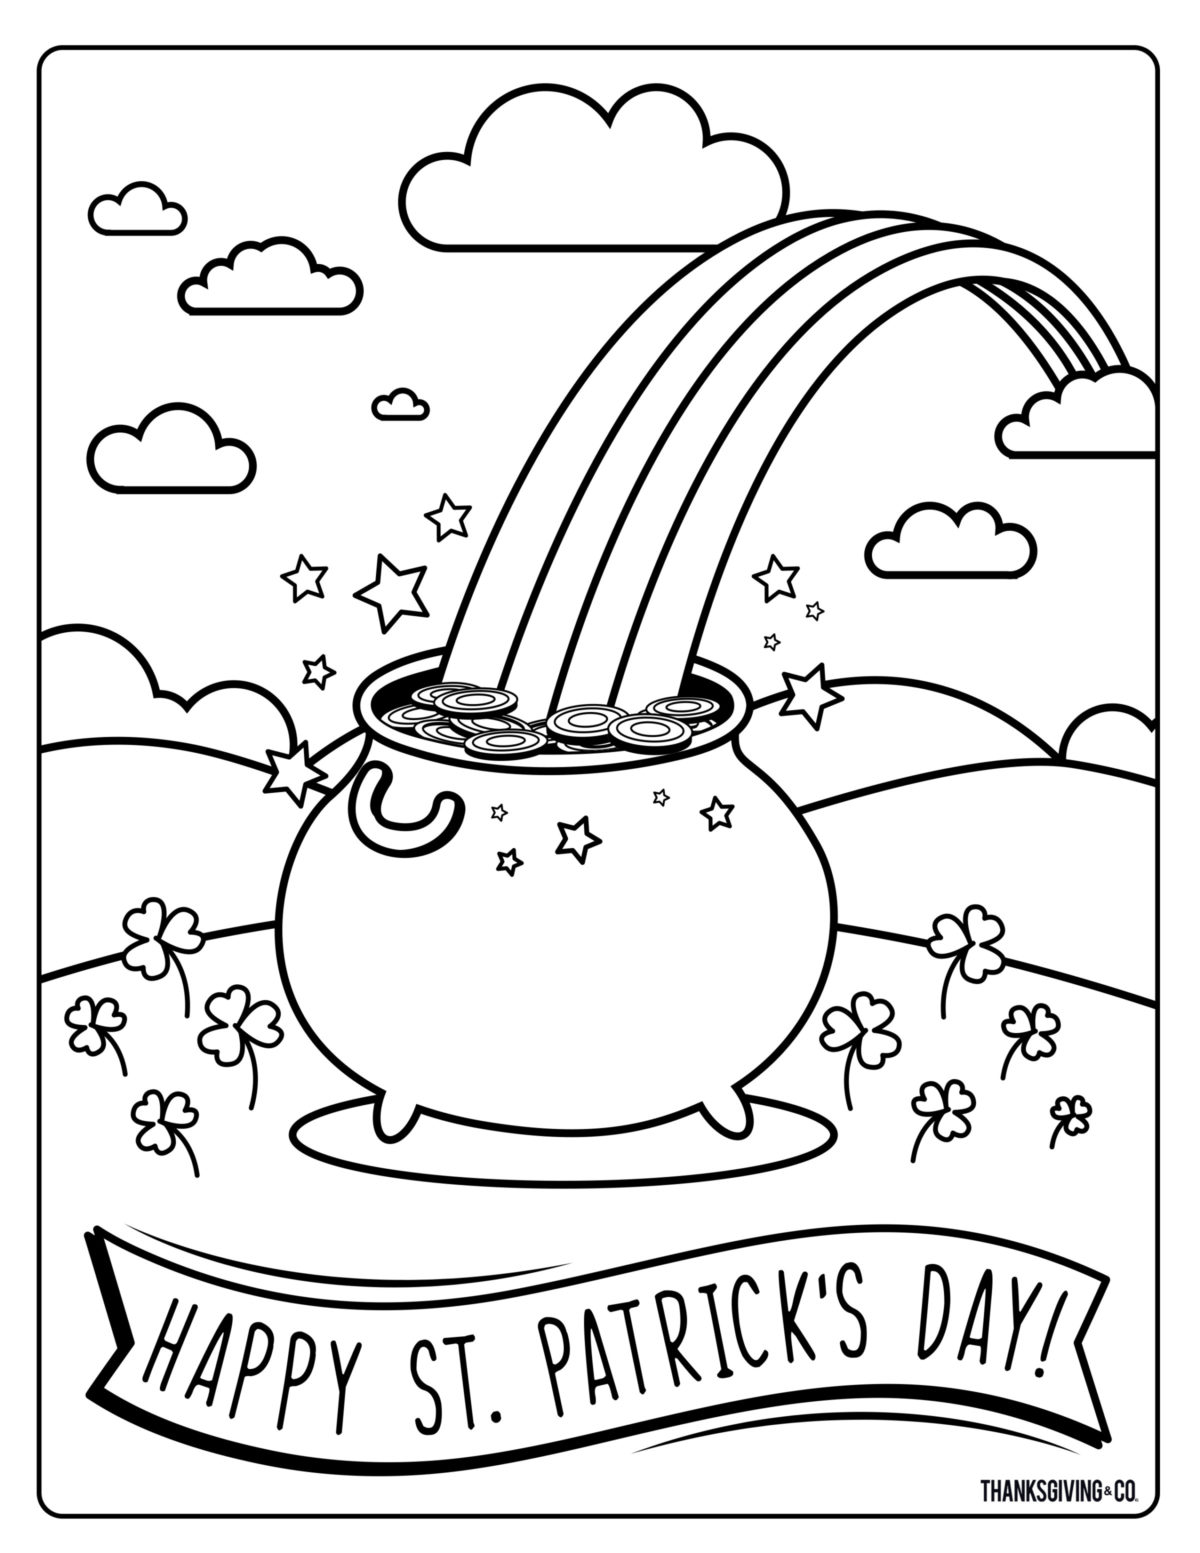 6 printable, whimsical St. Patrick's Day coloring pages for kids